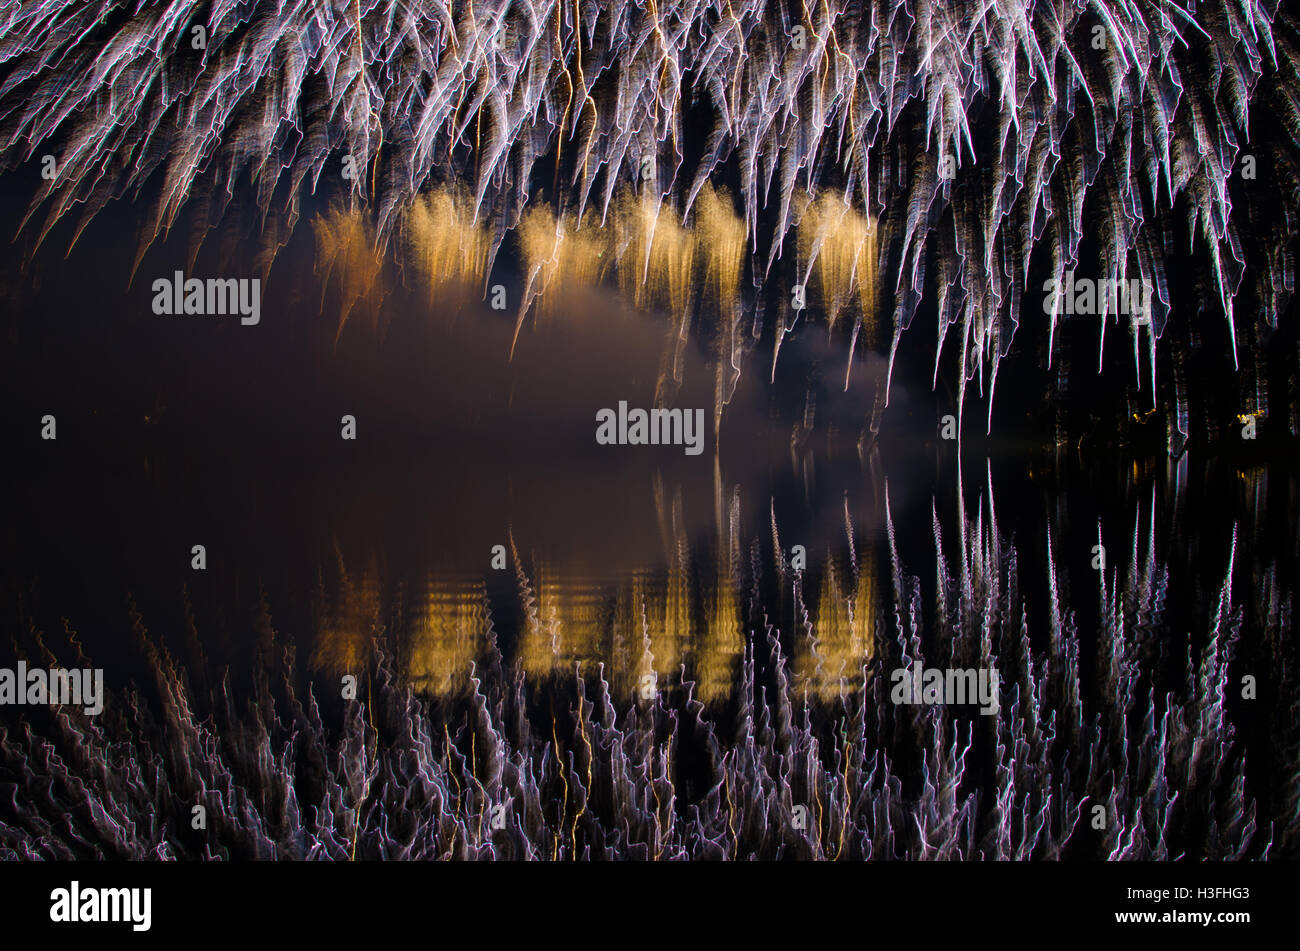 Fireworks reflecting on water at night Stock Photo